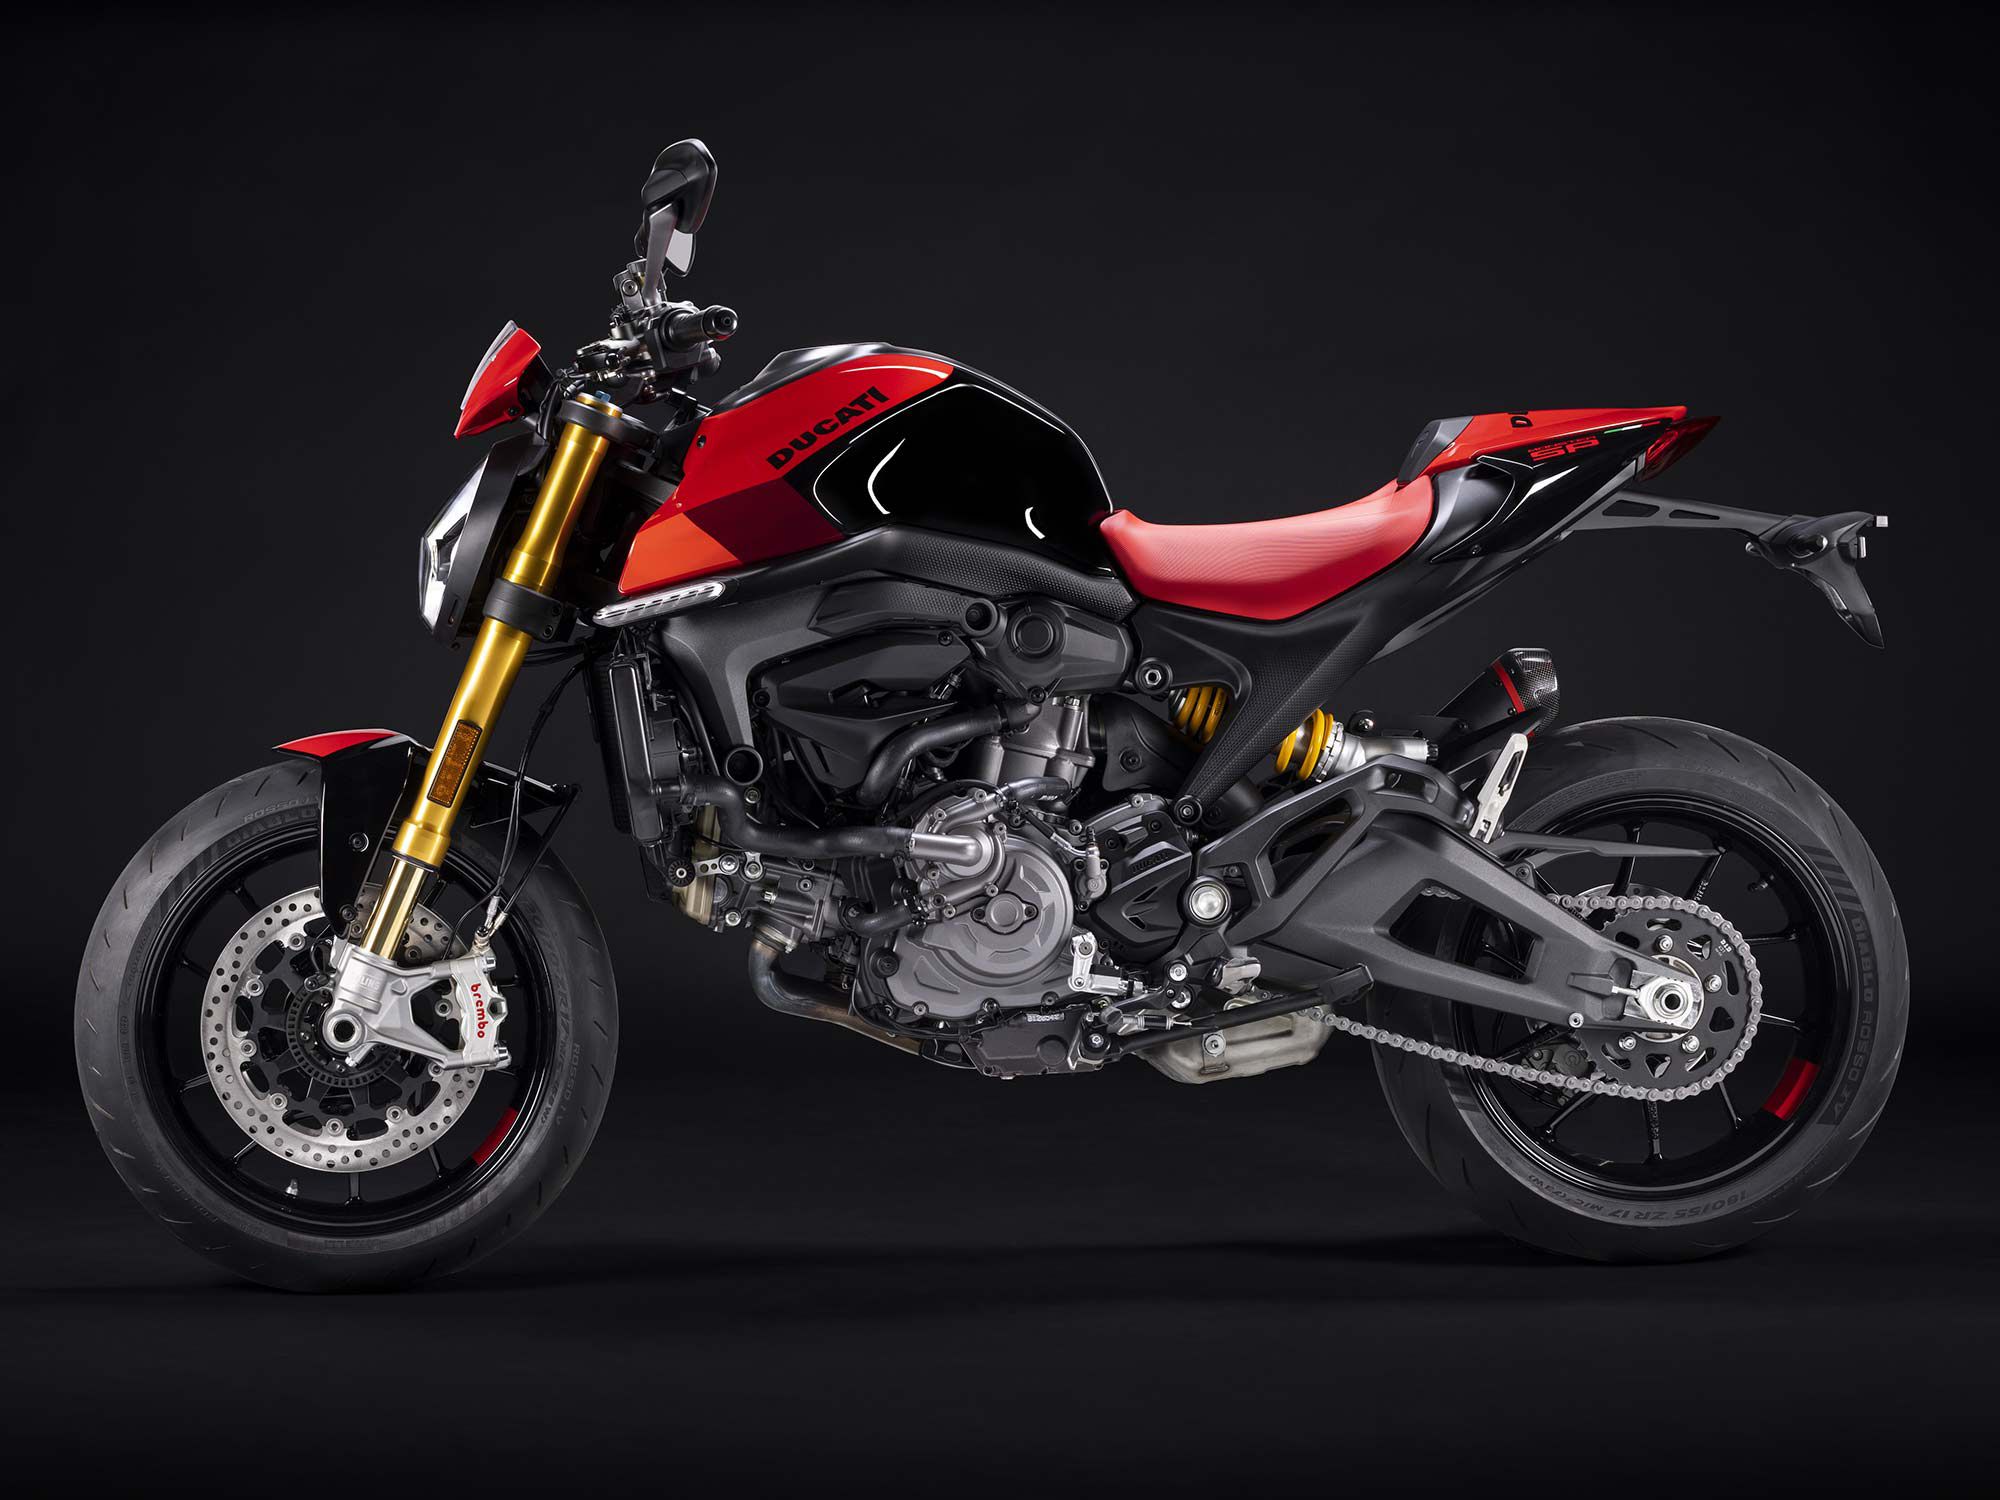 The 2023 Ducati Monster SP will lead the Monster lineup.